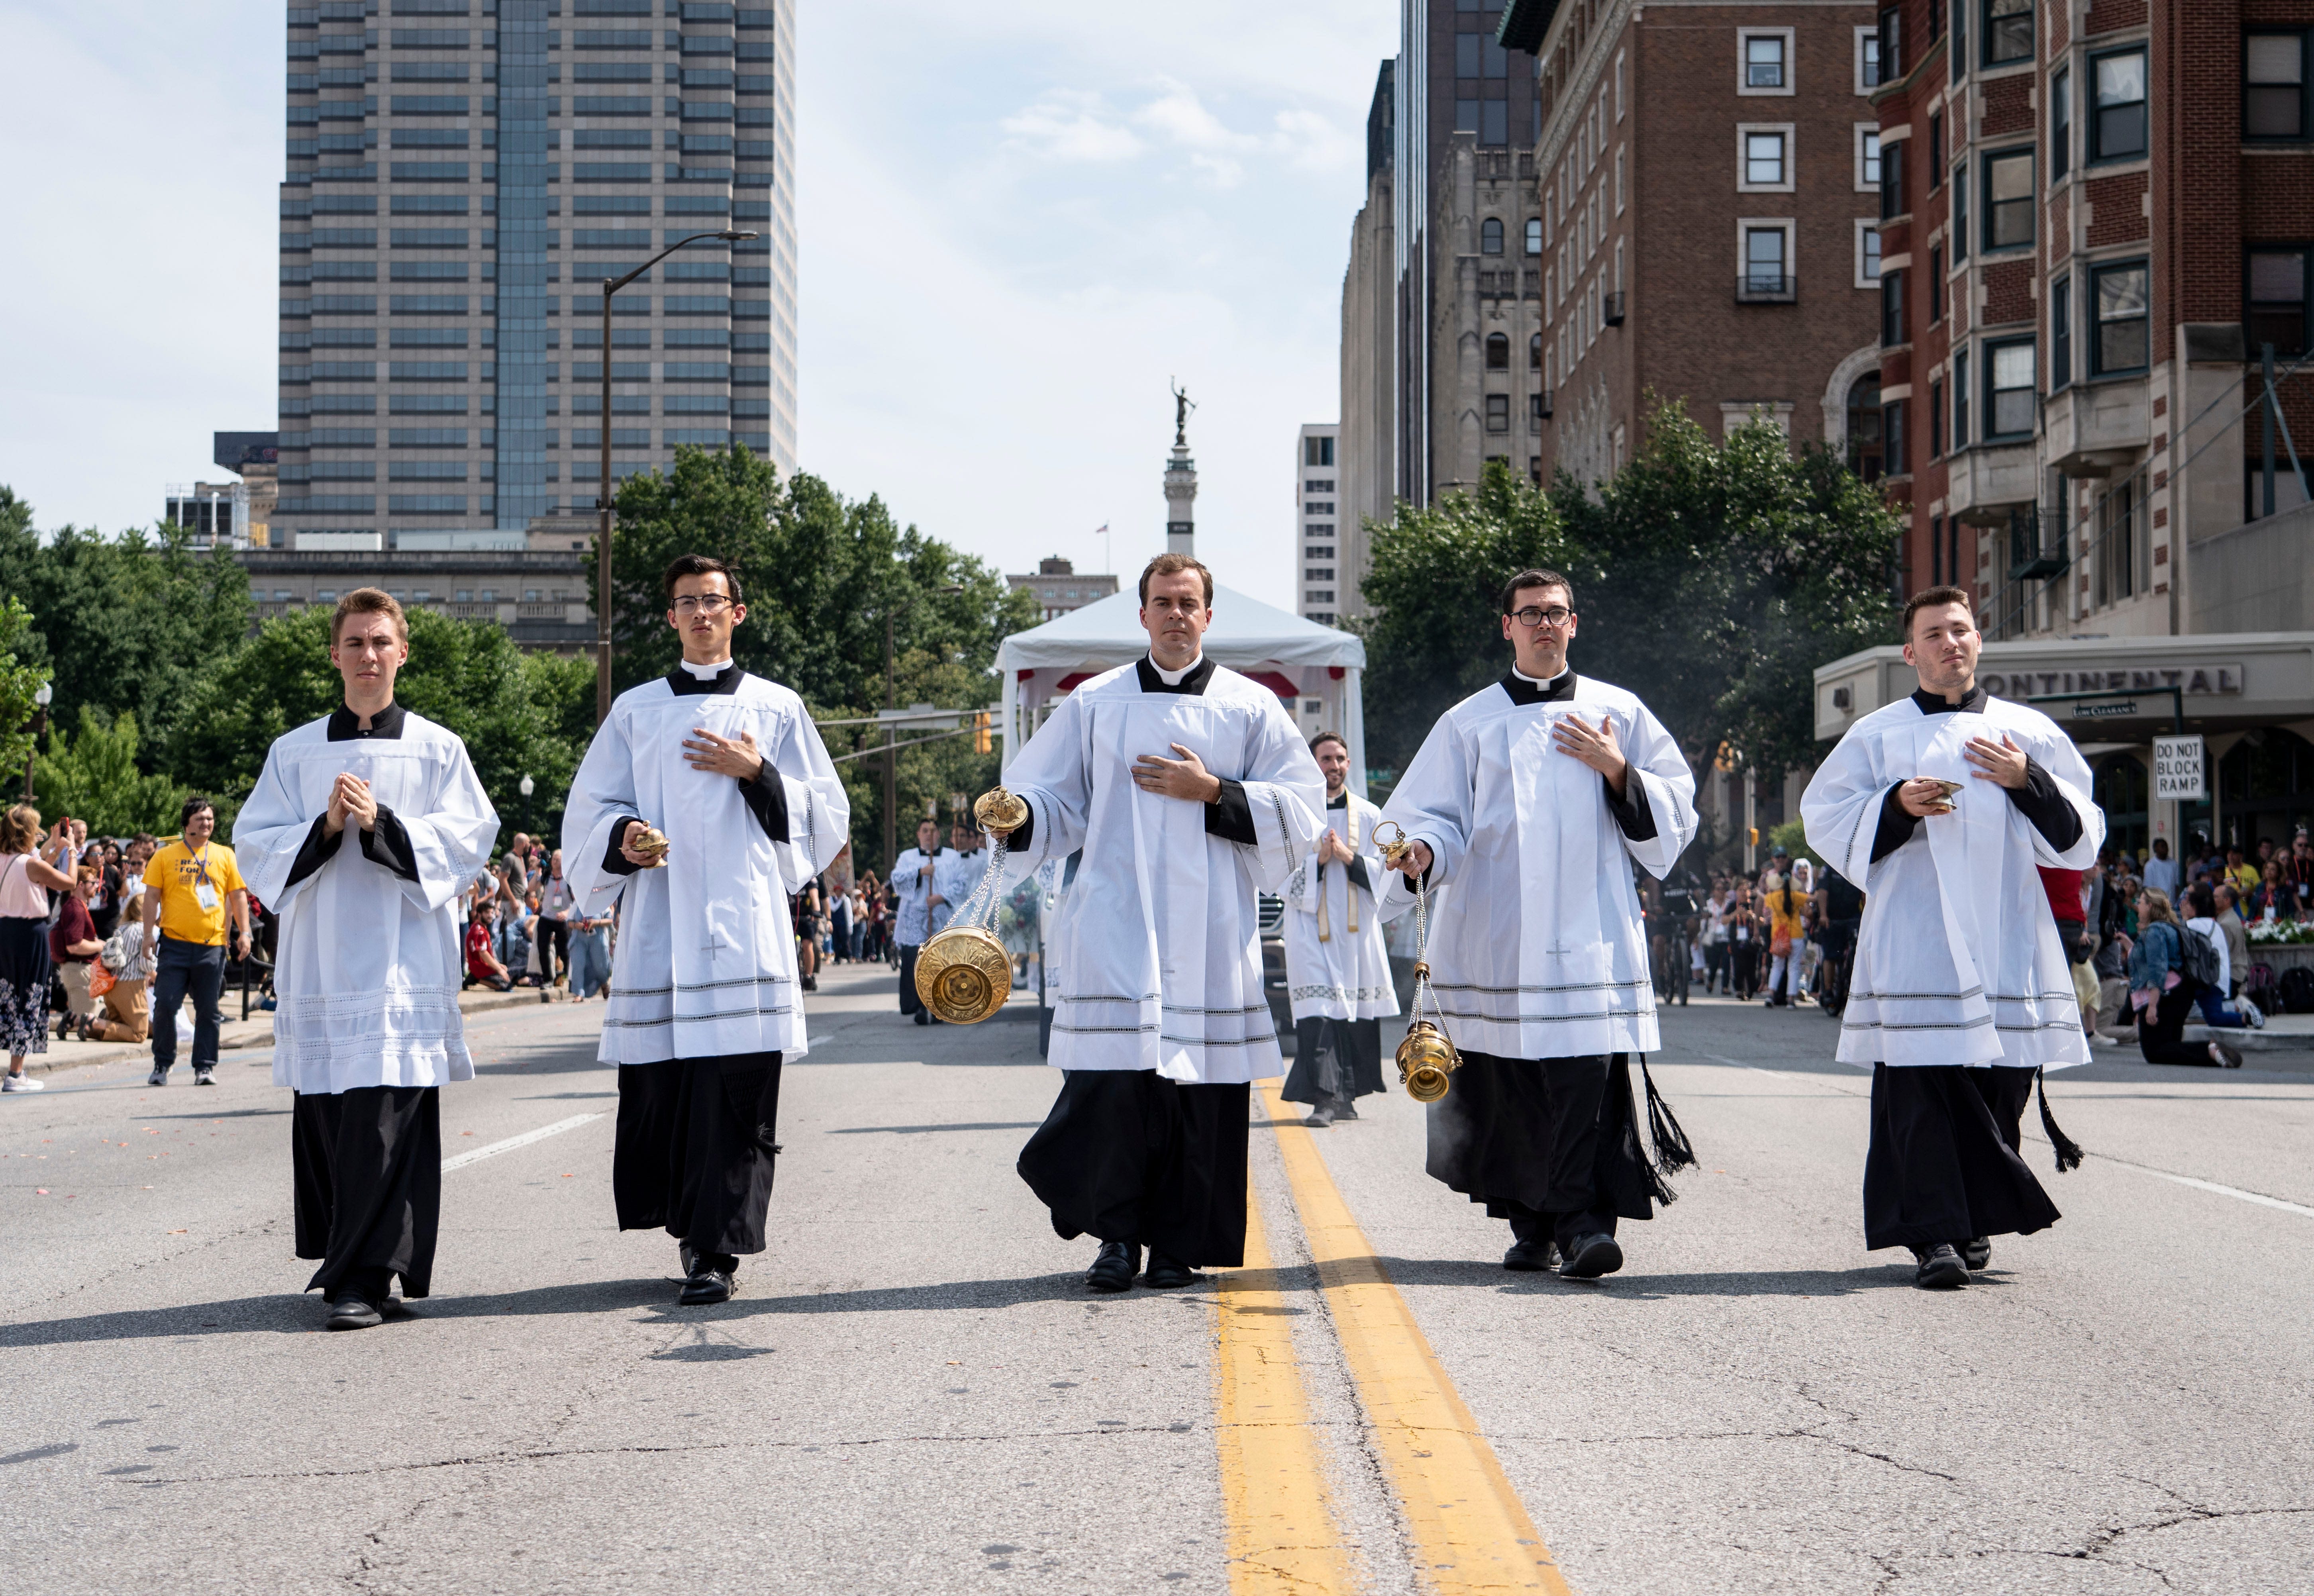 Eucharistic procession invoked 'a moment of unity' for thousands of Catholics